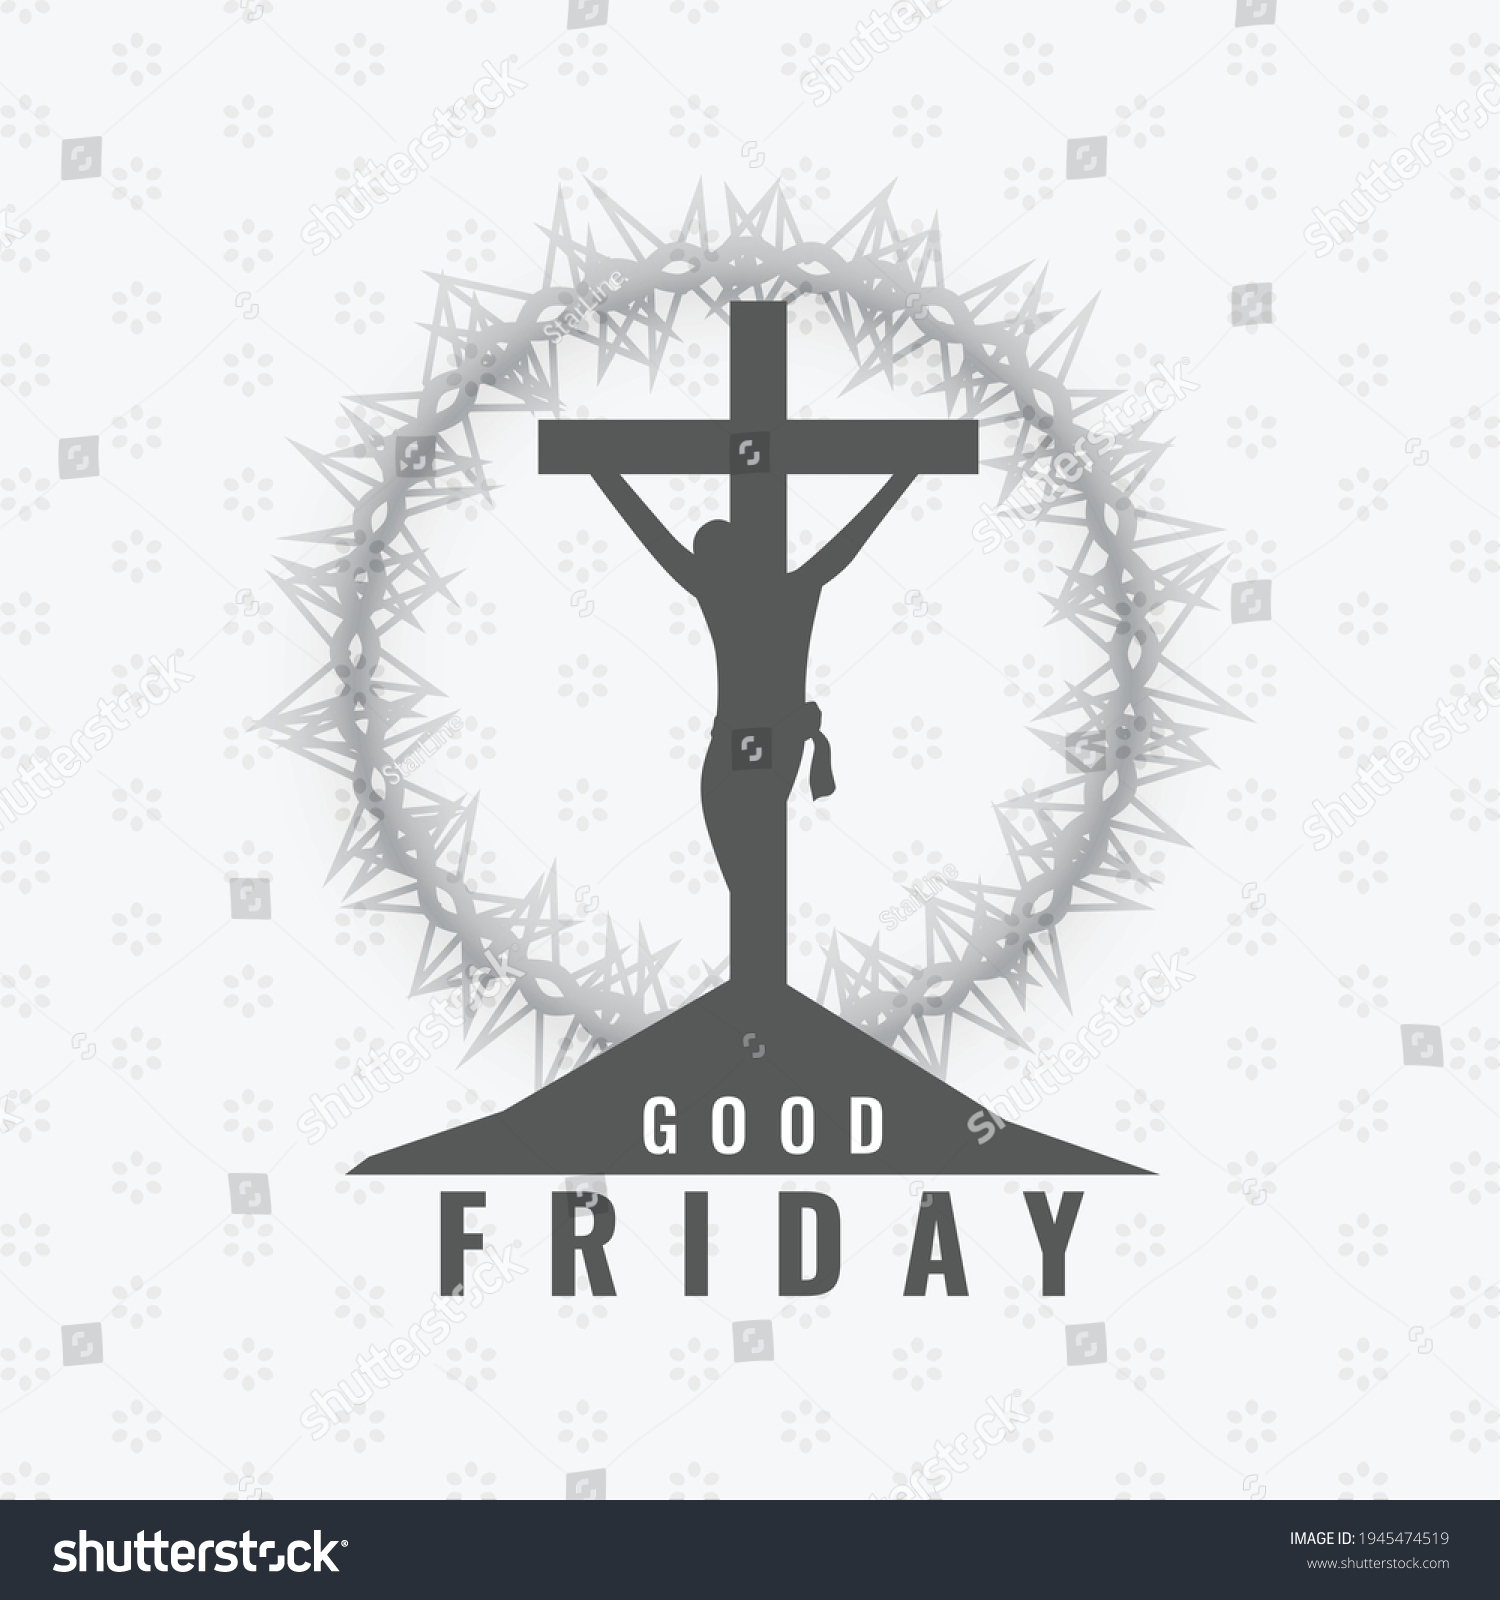 Good Friday Background Cross Crown Thorns Stock Vector (Royalty Free ...